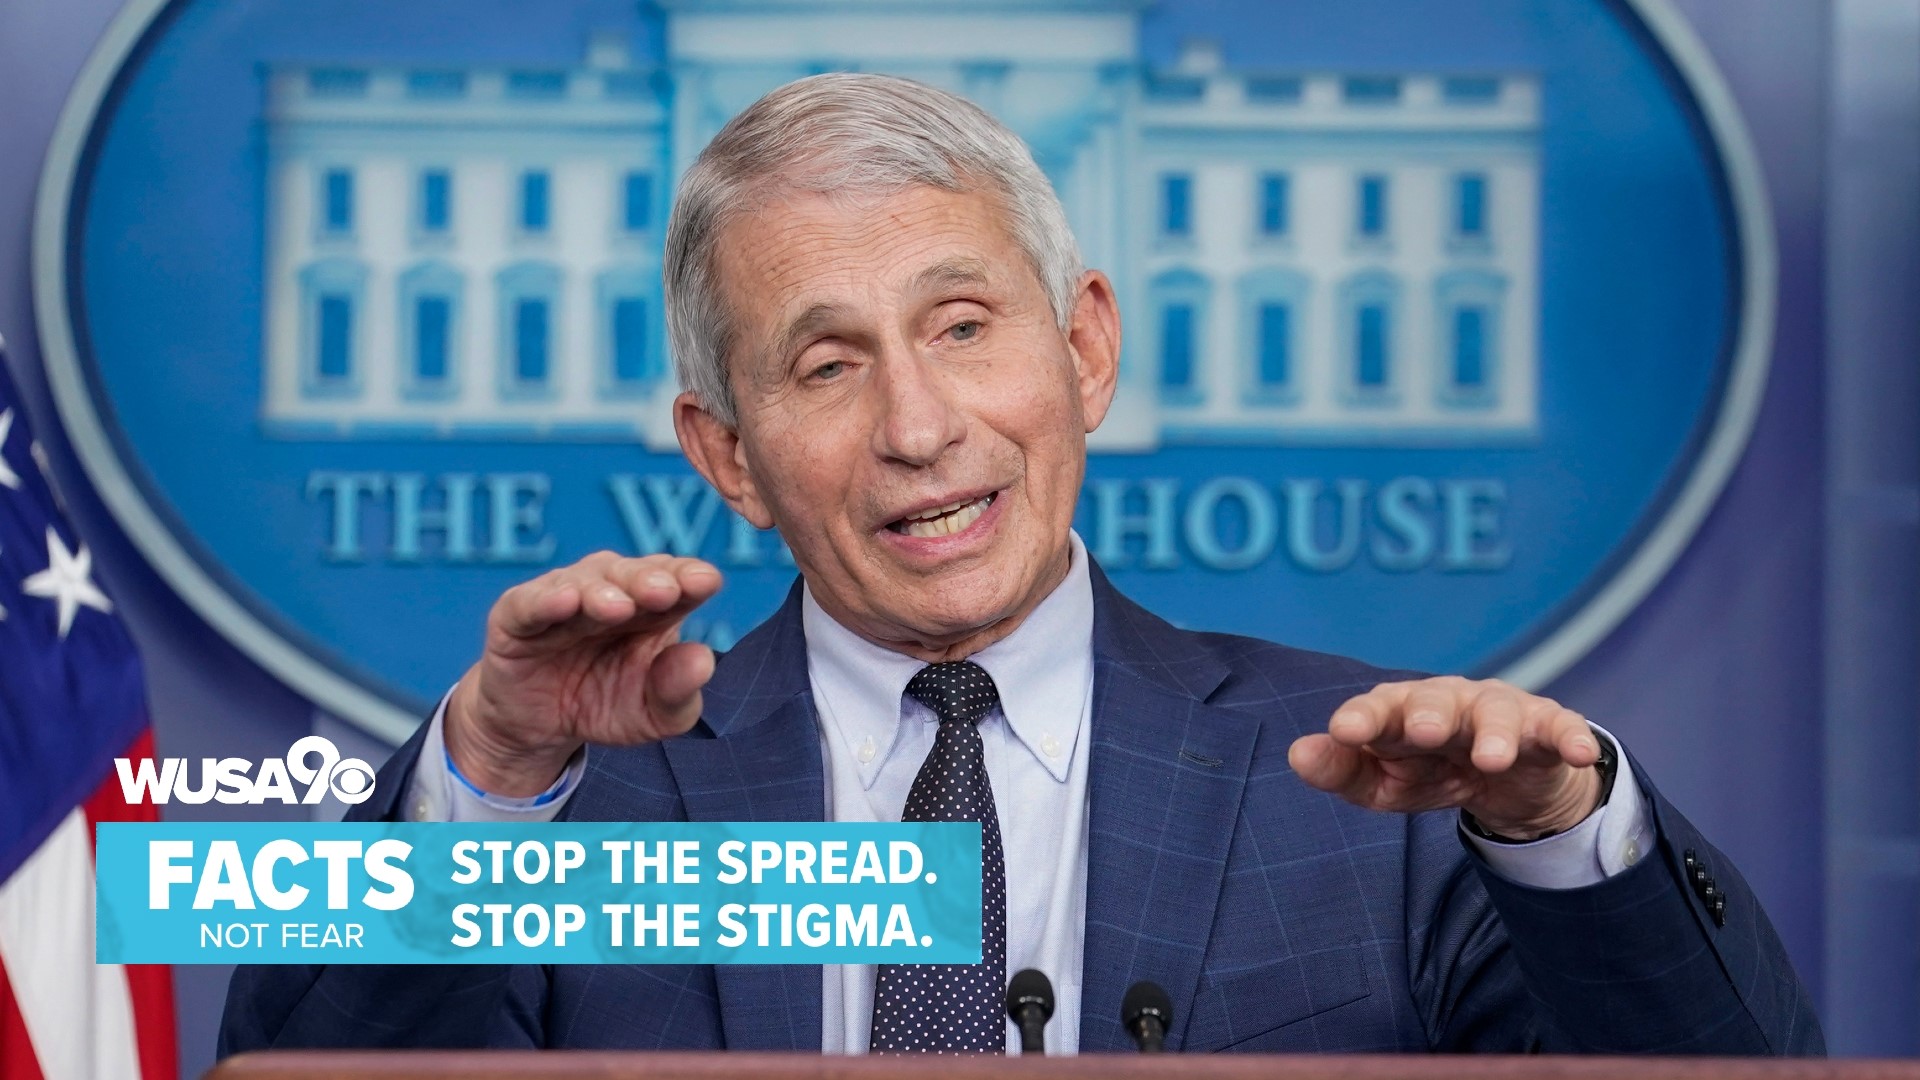 Dr. Fauci talks monkeypox for our special report Facts Not Fear: Stop the Spread. Stop the Stigma.